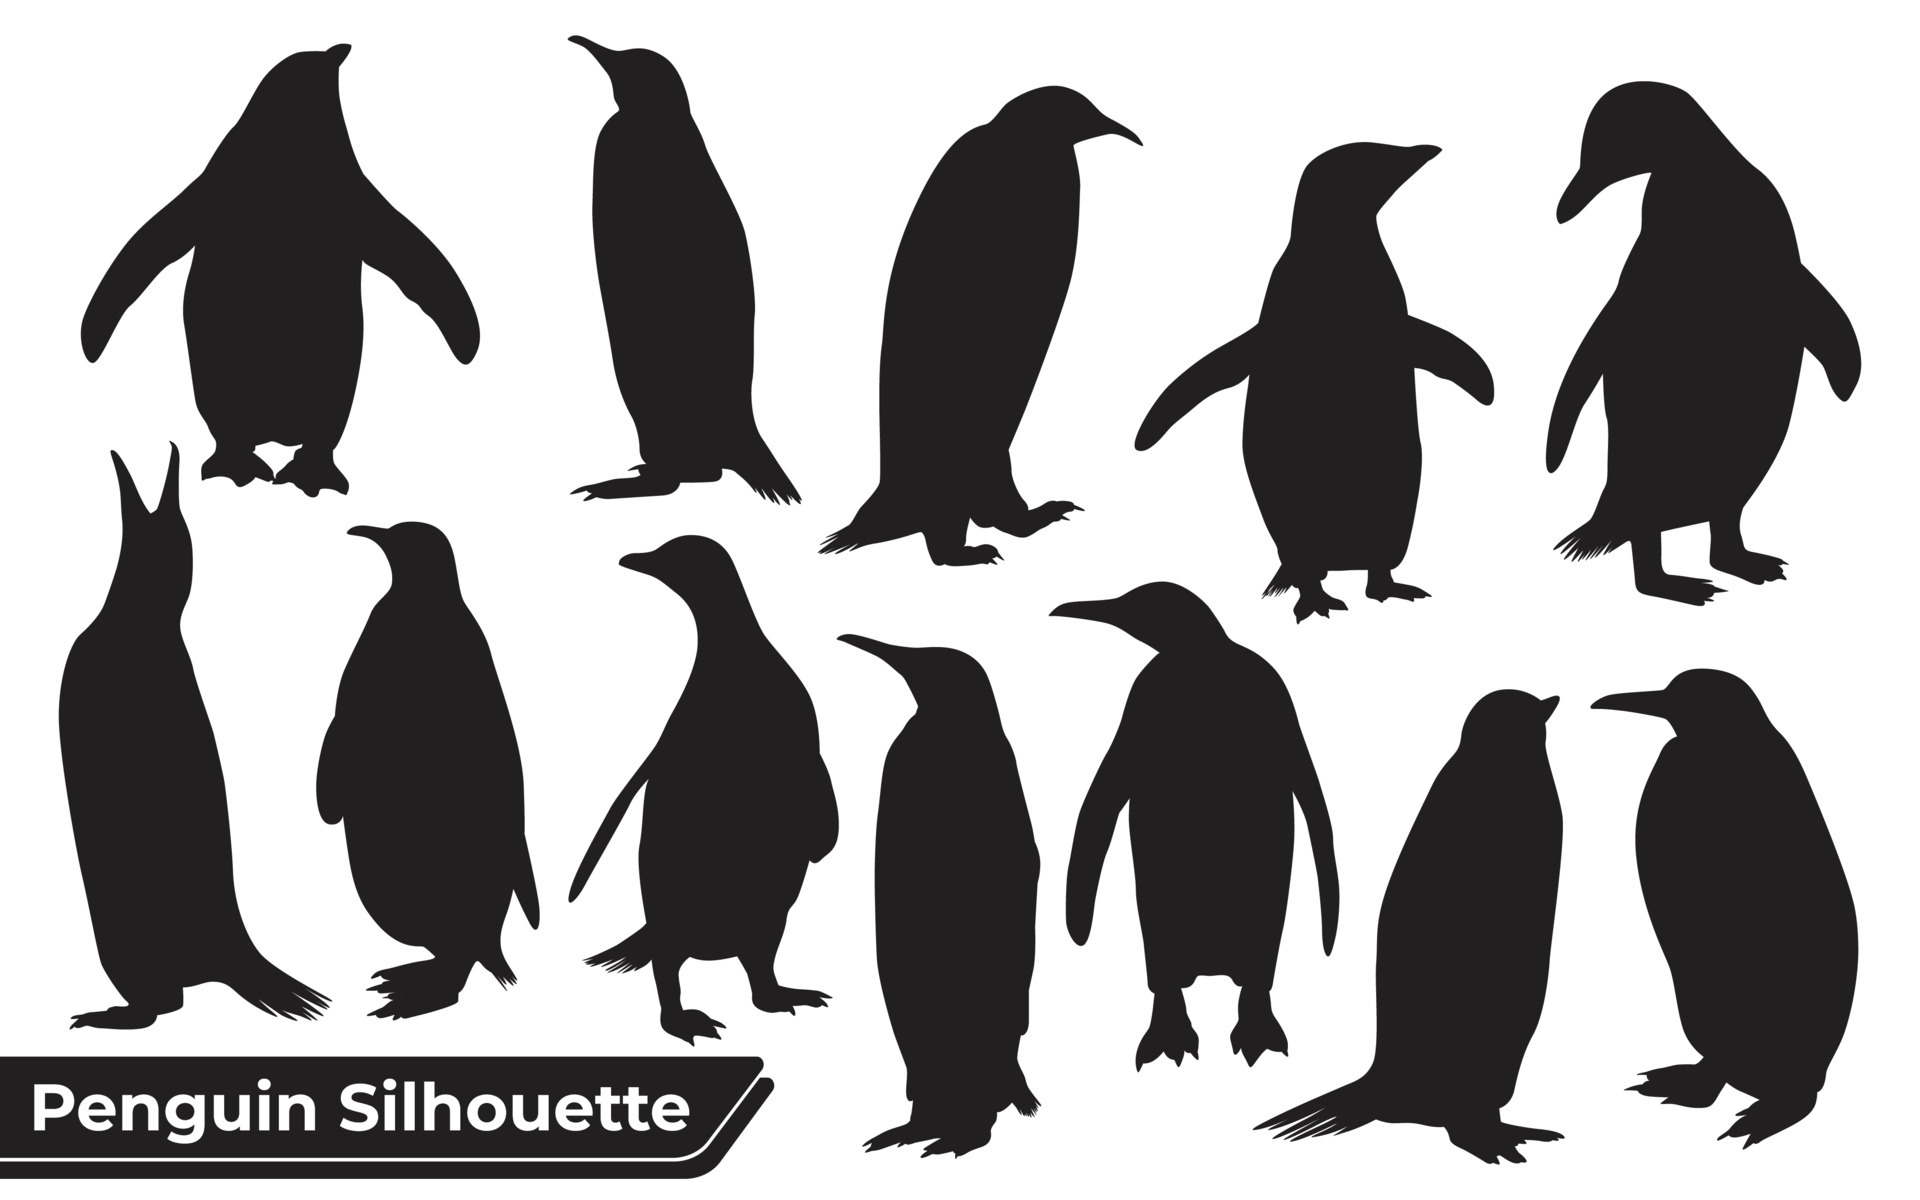 Penguin Silhouette Vector Art Icons And Graphics For Free Download